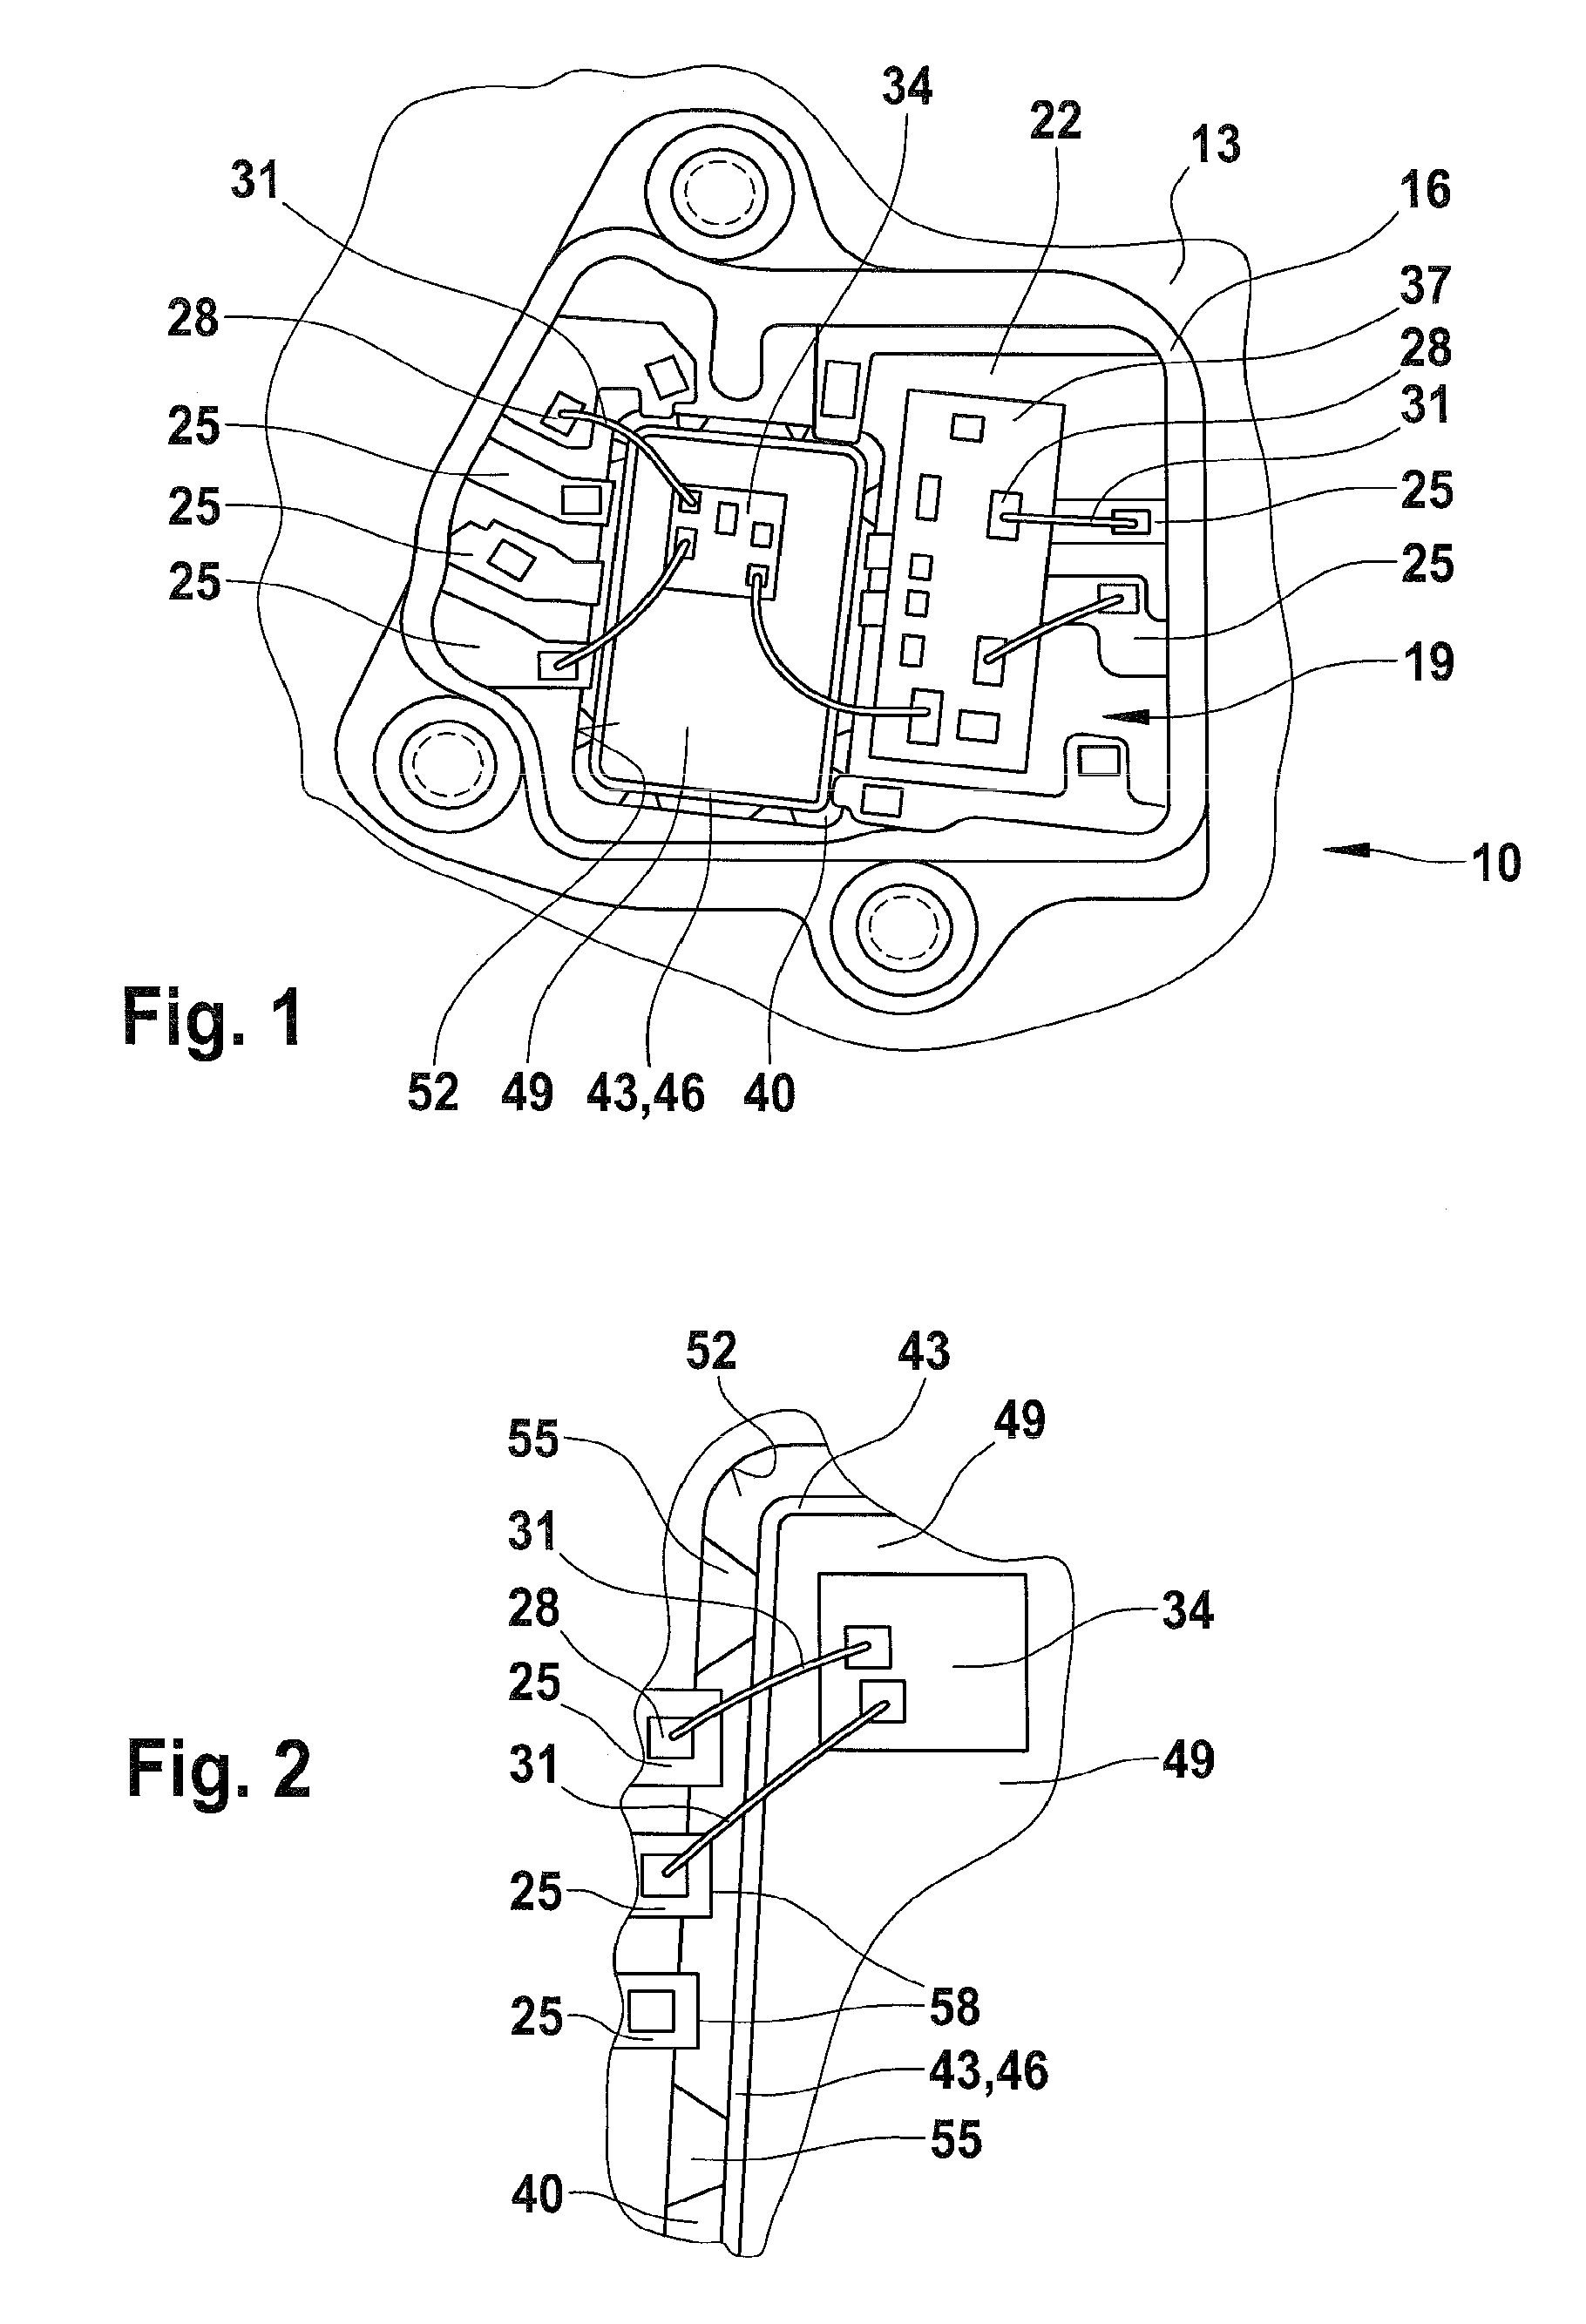 Electrical device